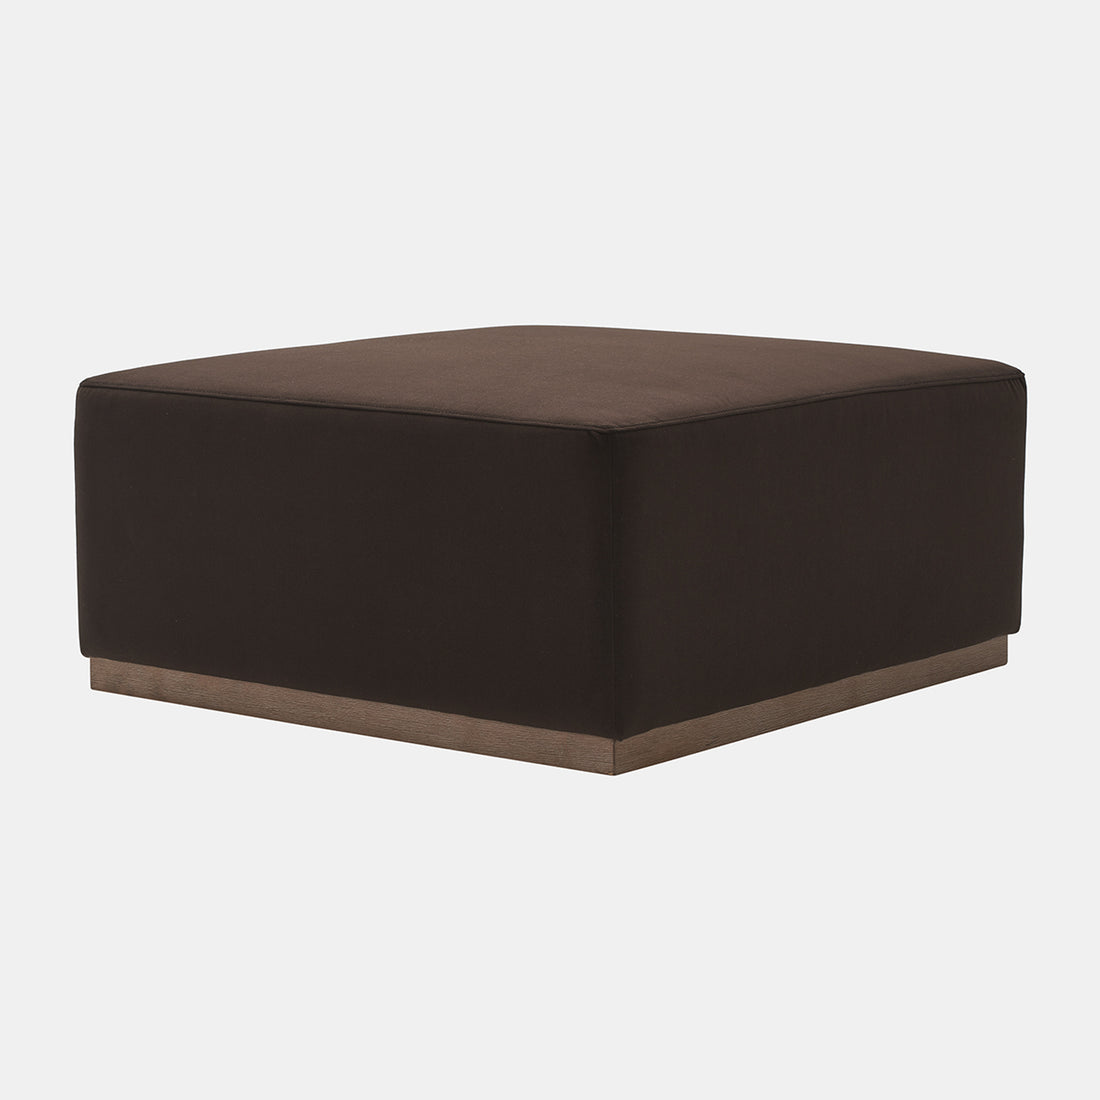 Sagebrook Home 40x18 Upholstered Square Ottoman, Brown